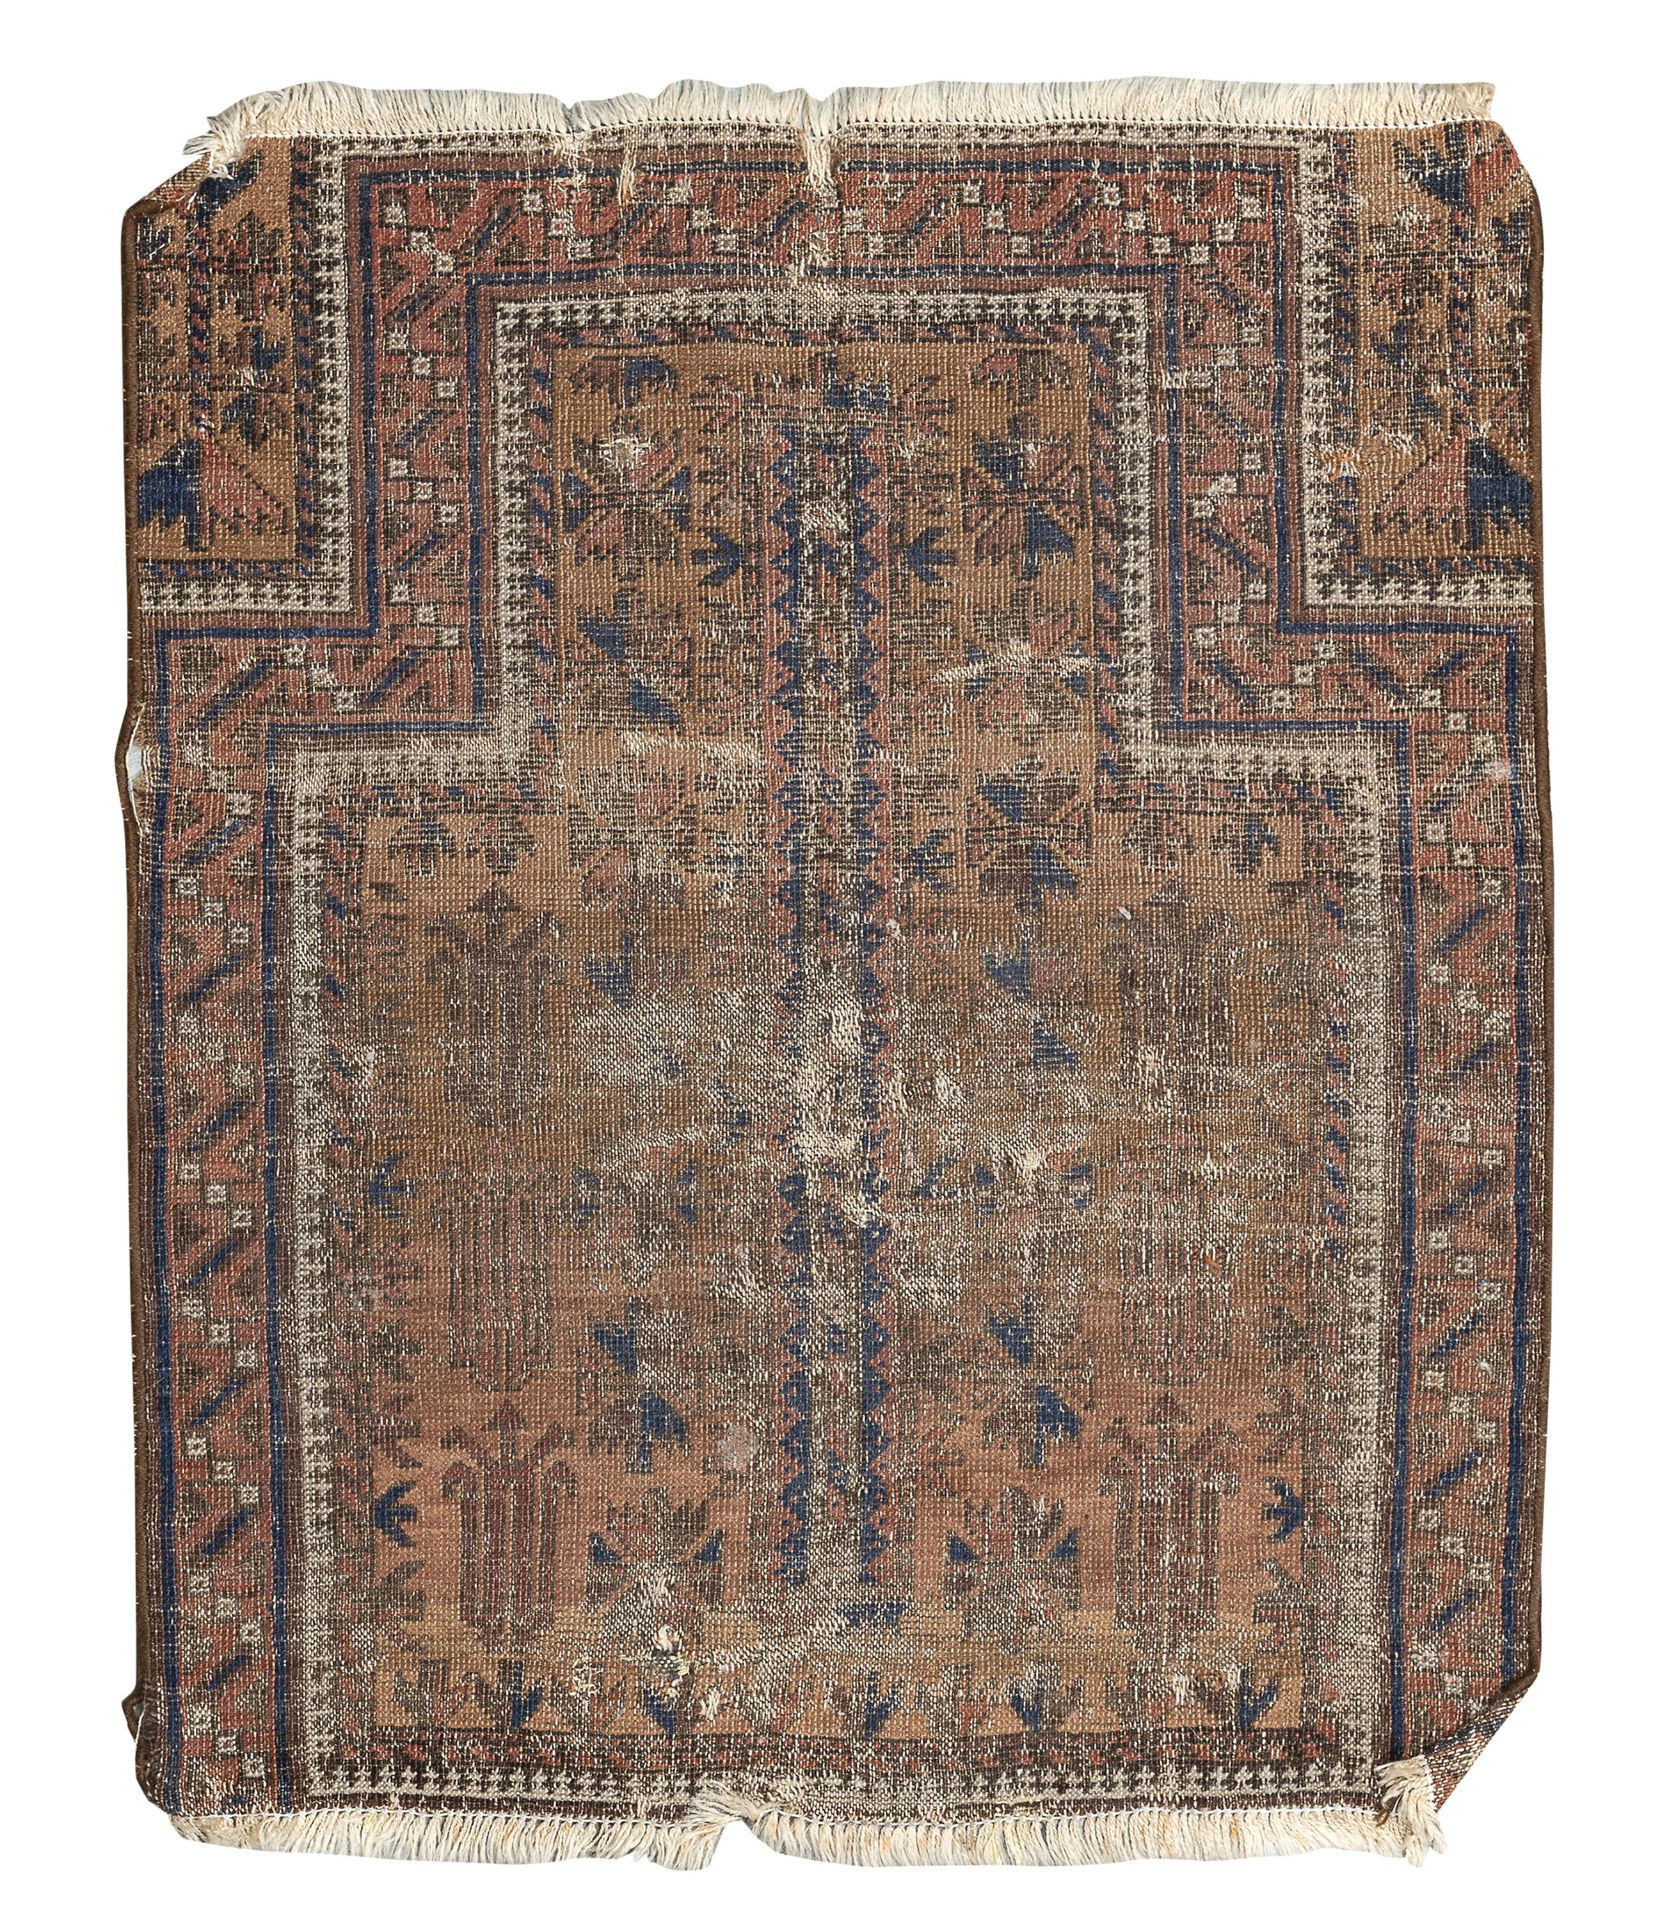 REMAINS OF ANCIENT BELUCHISTAN CARPET 19TH CENTURY